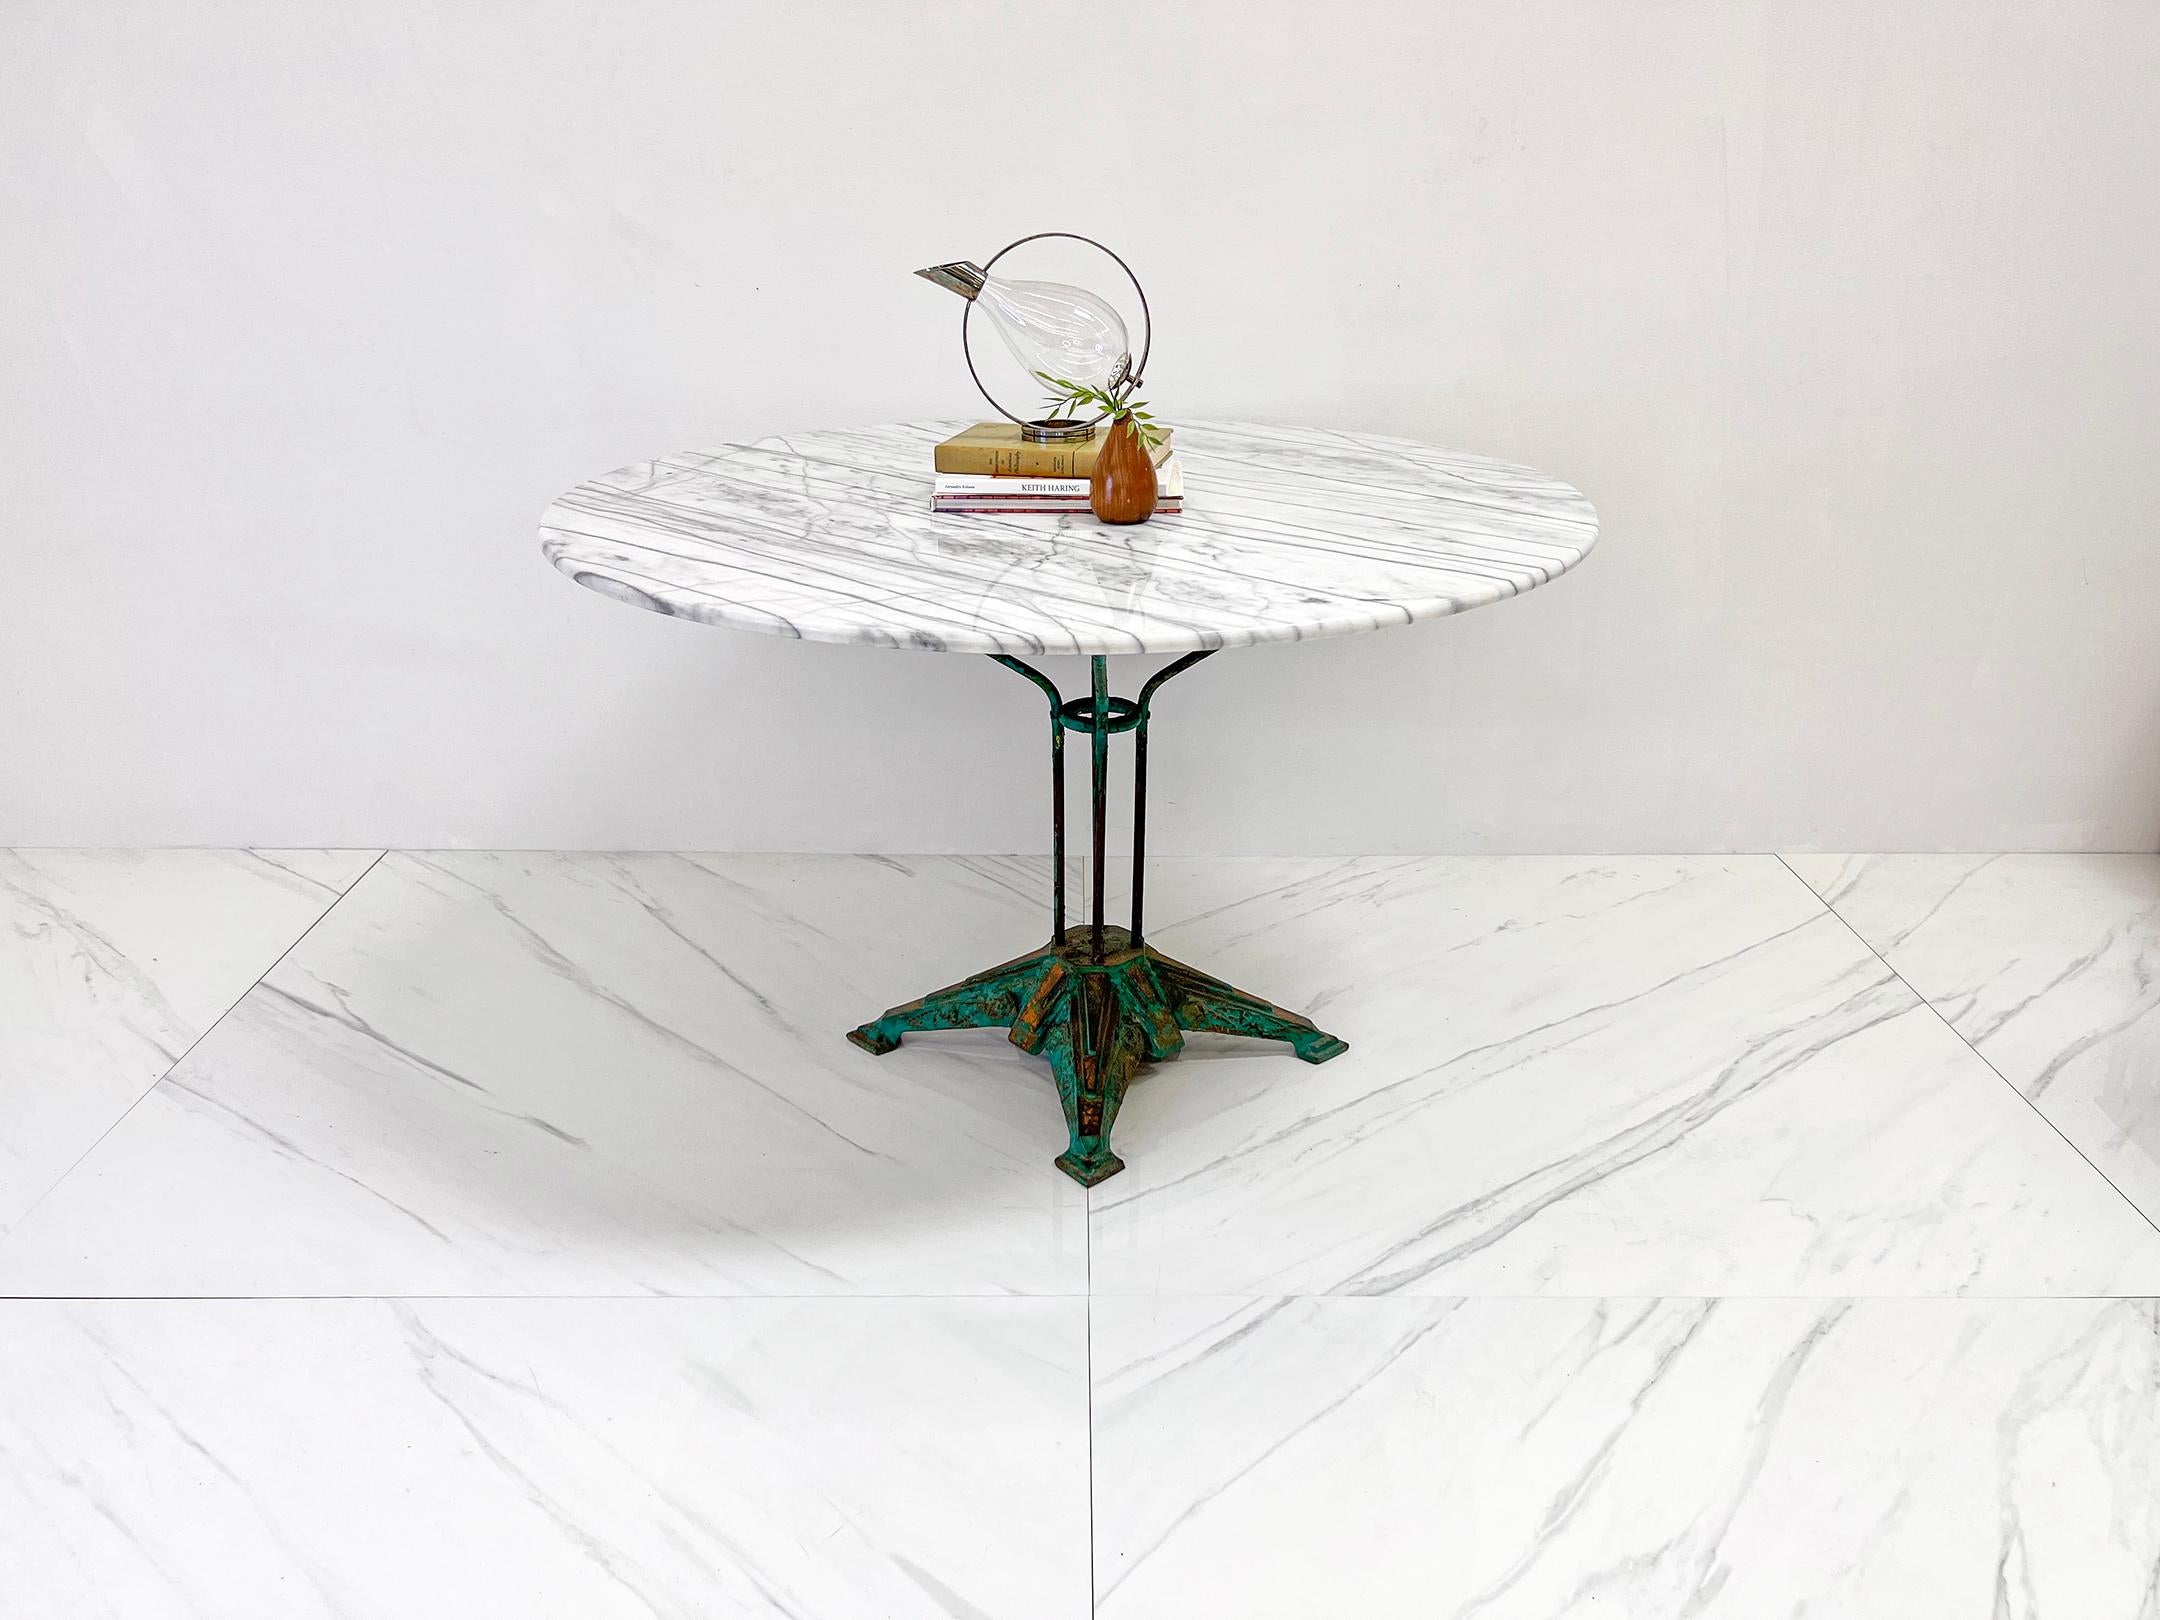 This table is absolutely stunning. A vintage iron Louis Vuitton dining or display table with a custom marble top. We acquired this table with a bit of lore to be had-- when we purchased it, we found it at an antique fair from a dealer who had